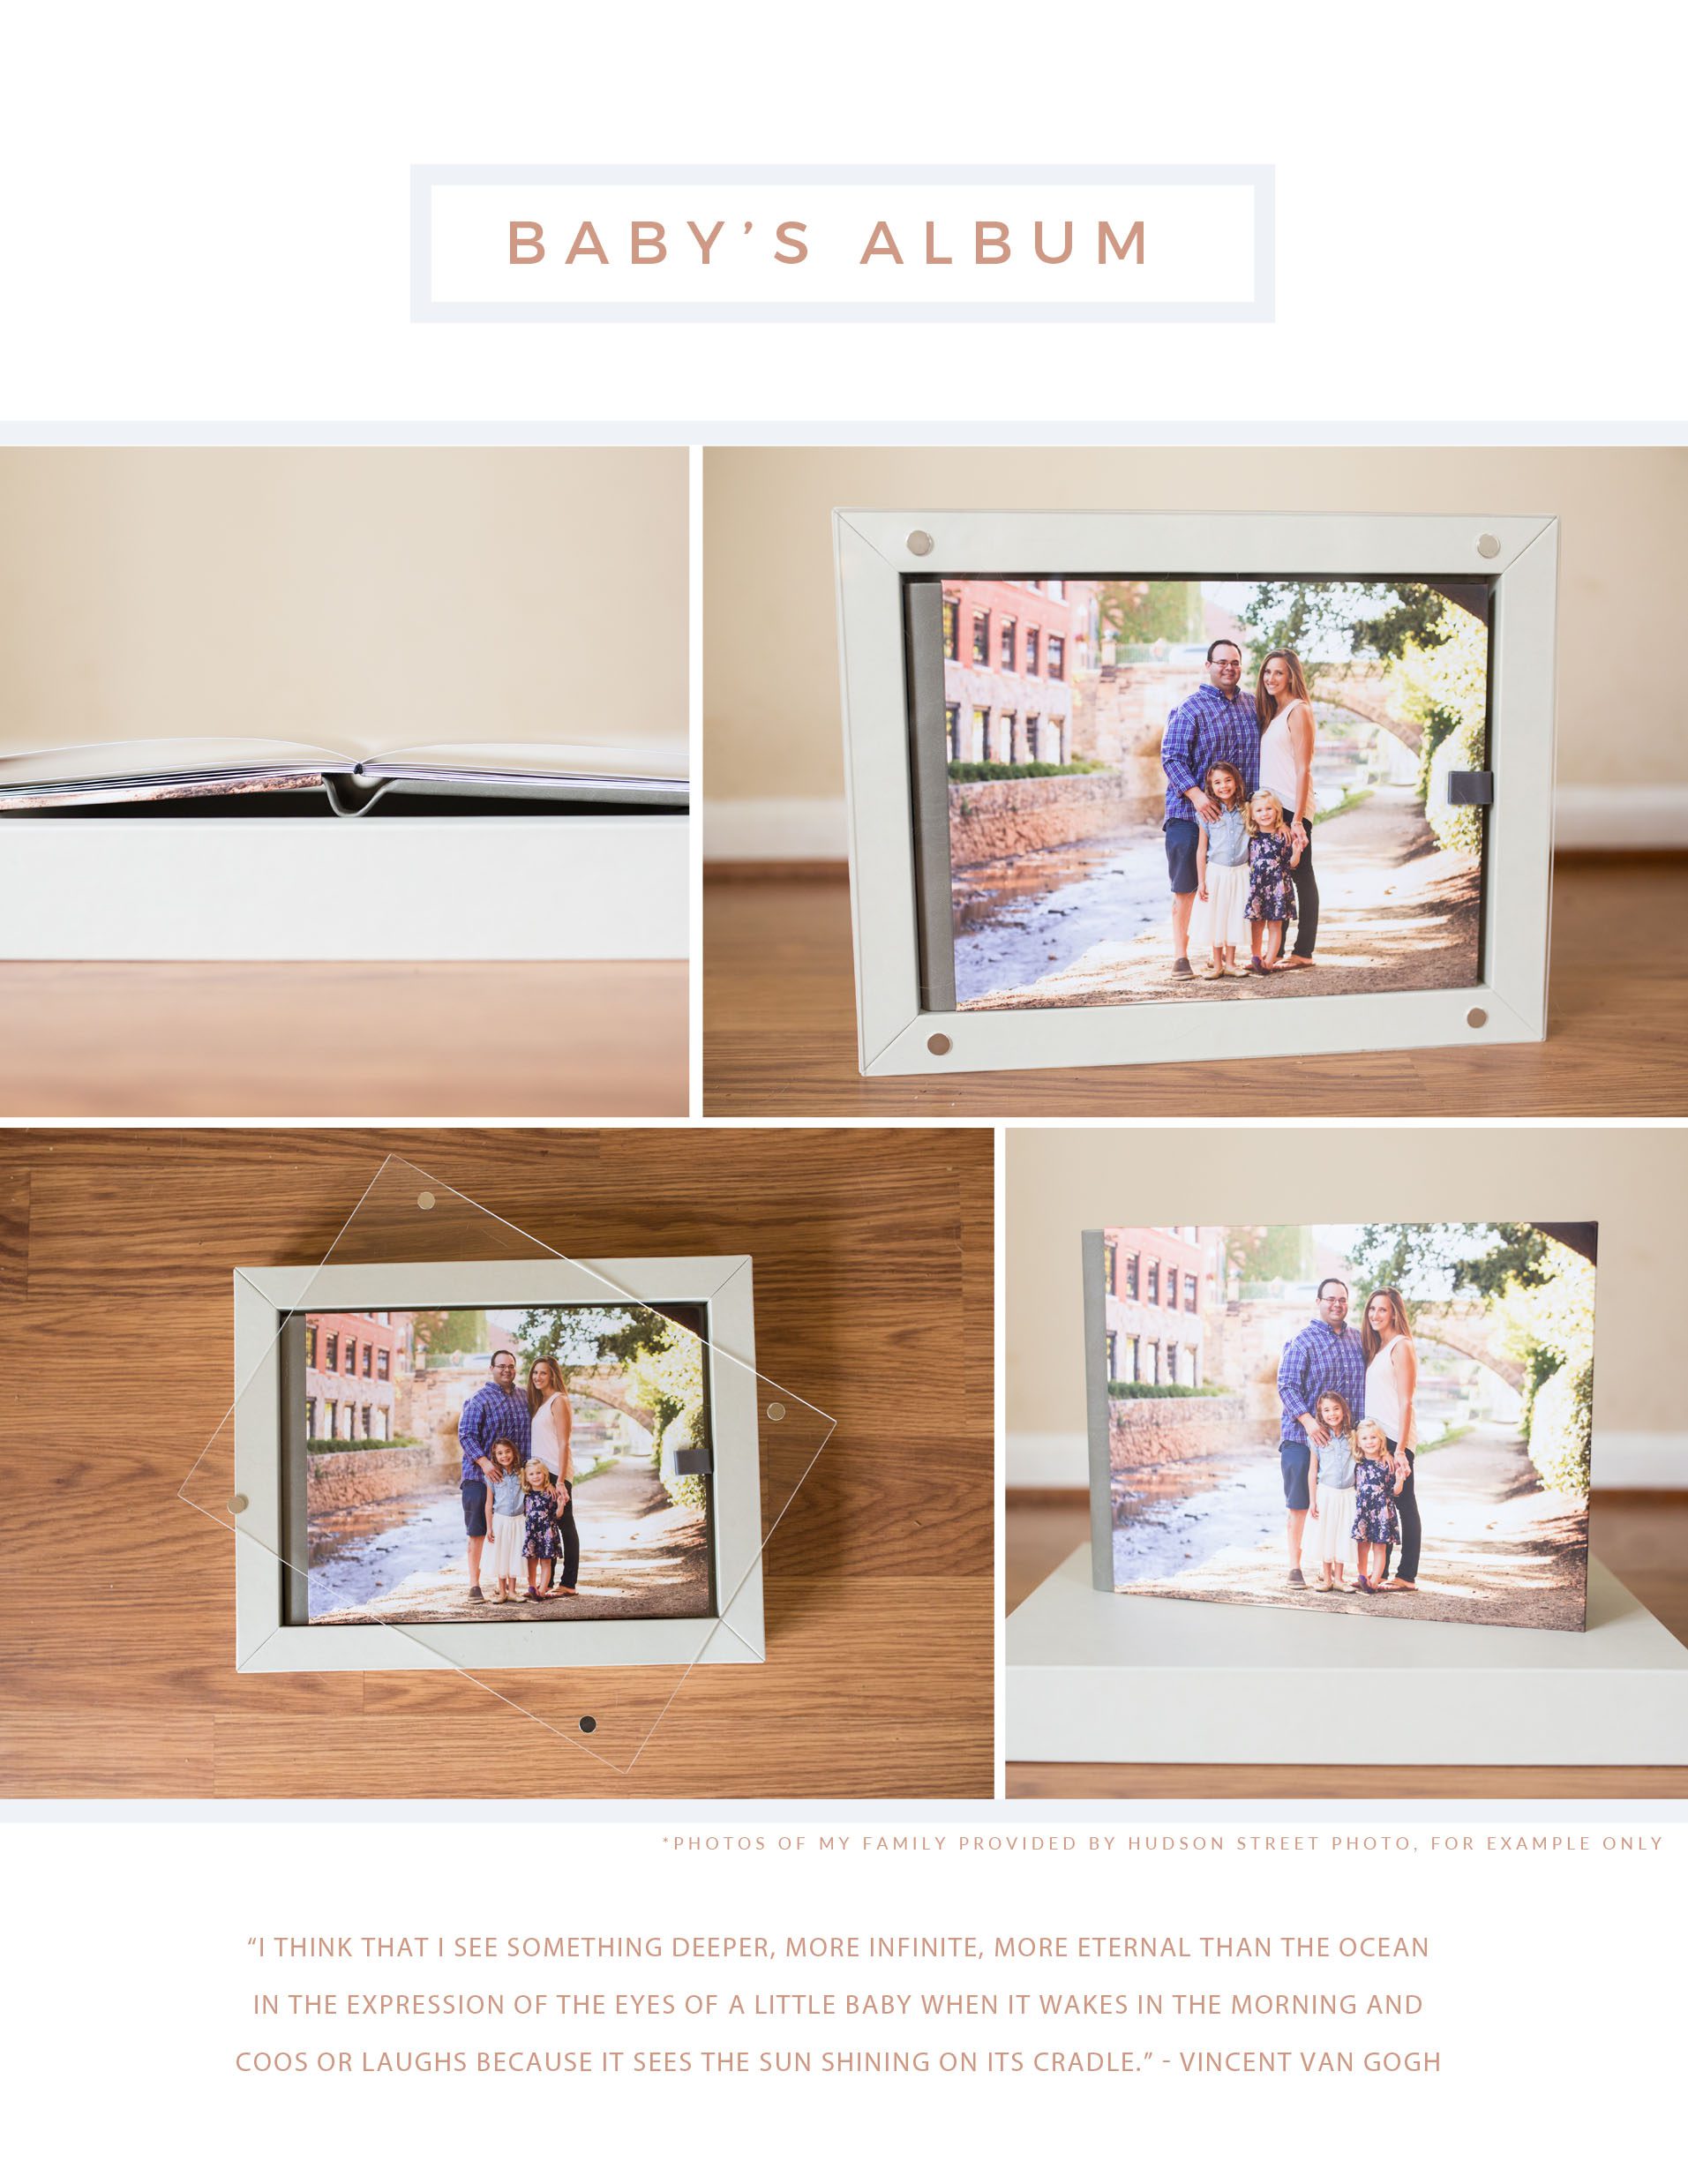 2018 New Client Welcome Guide from internationally published Northern Virginia newborn photographer Blaire Ring, Second Ave Photography.